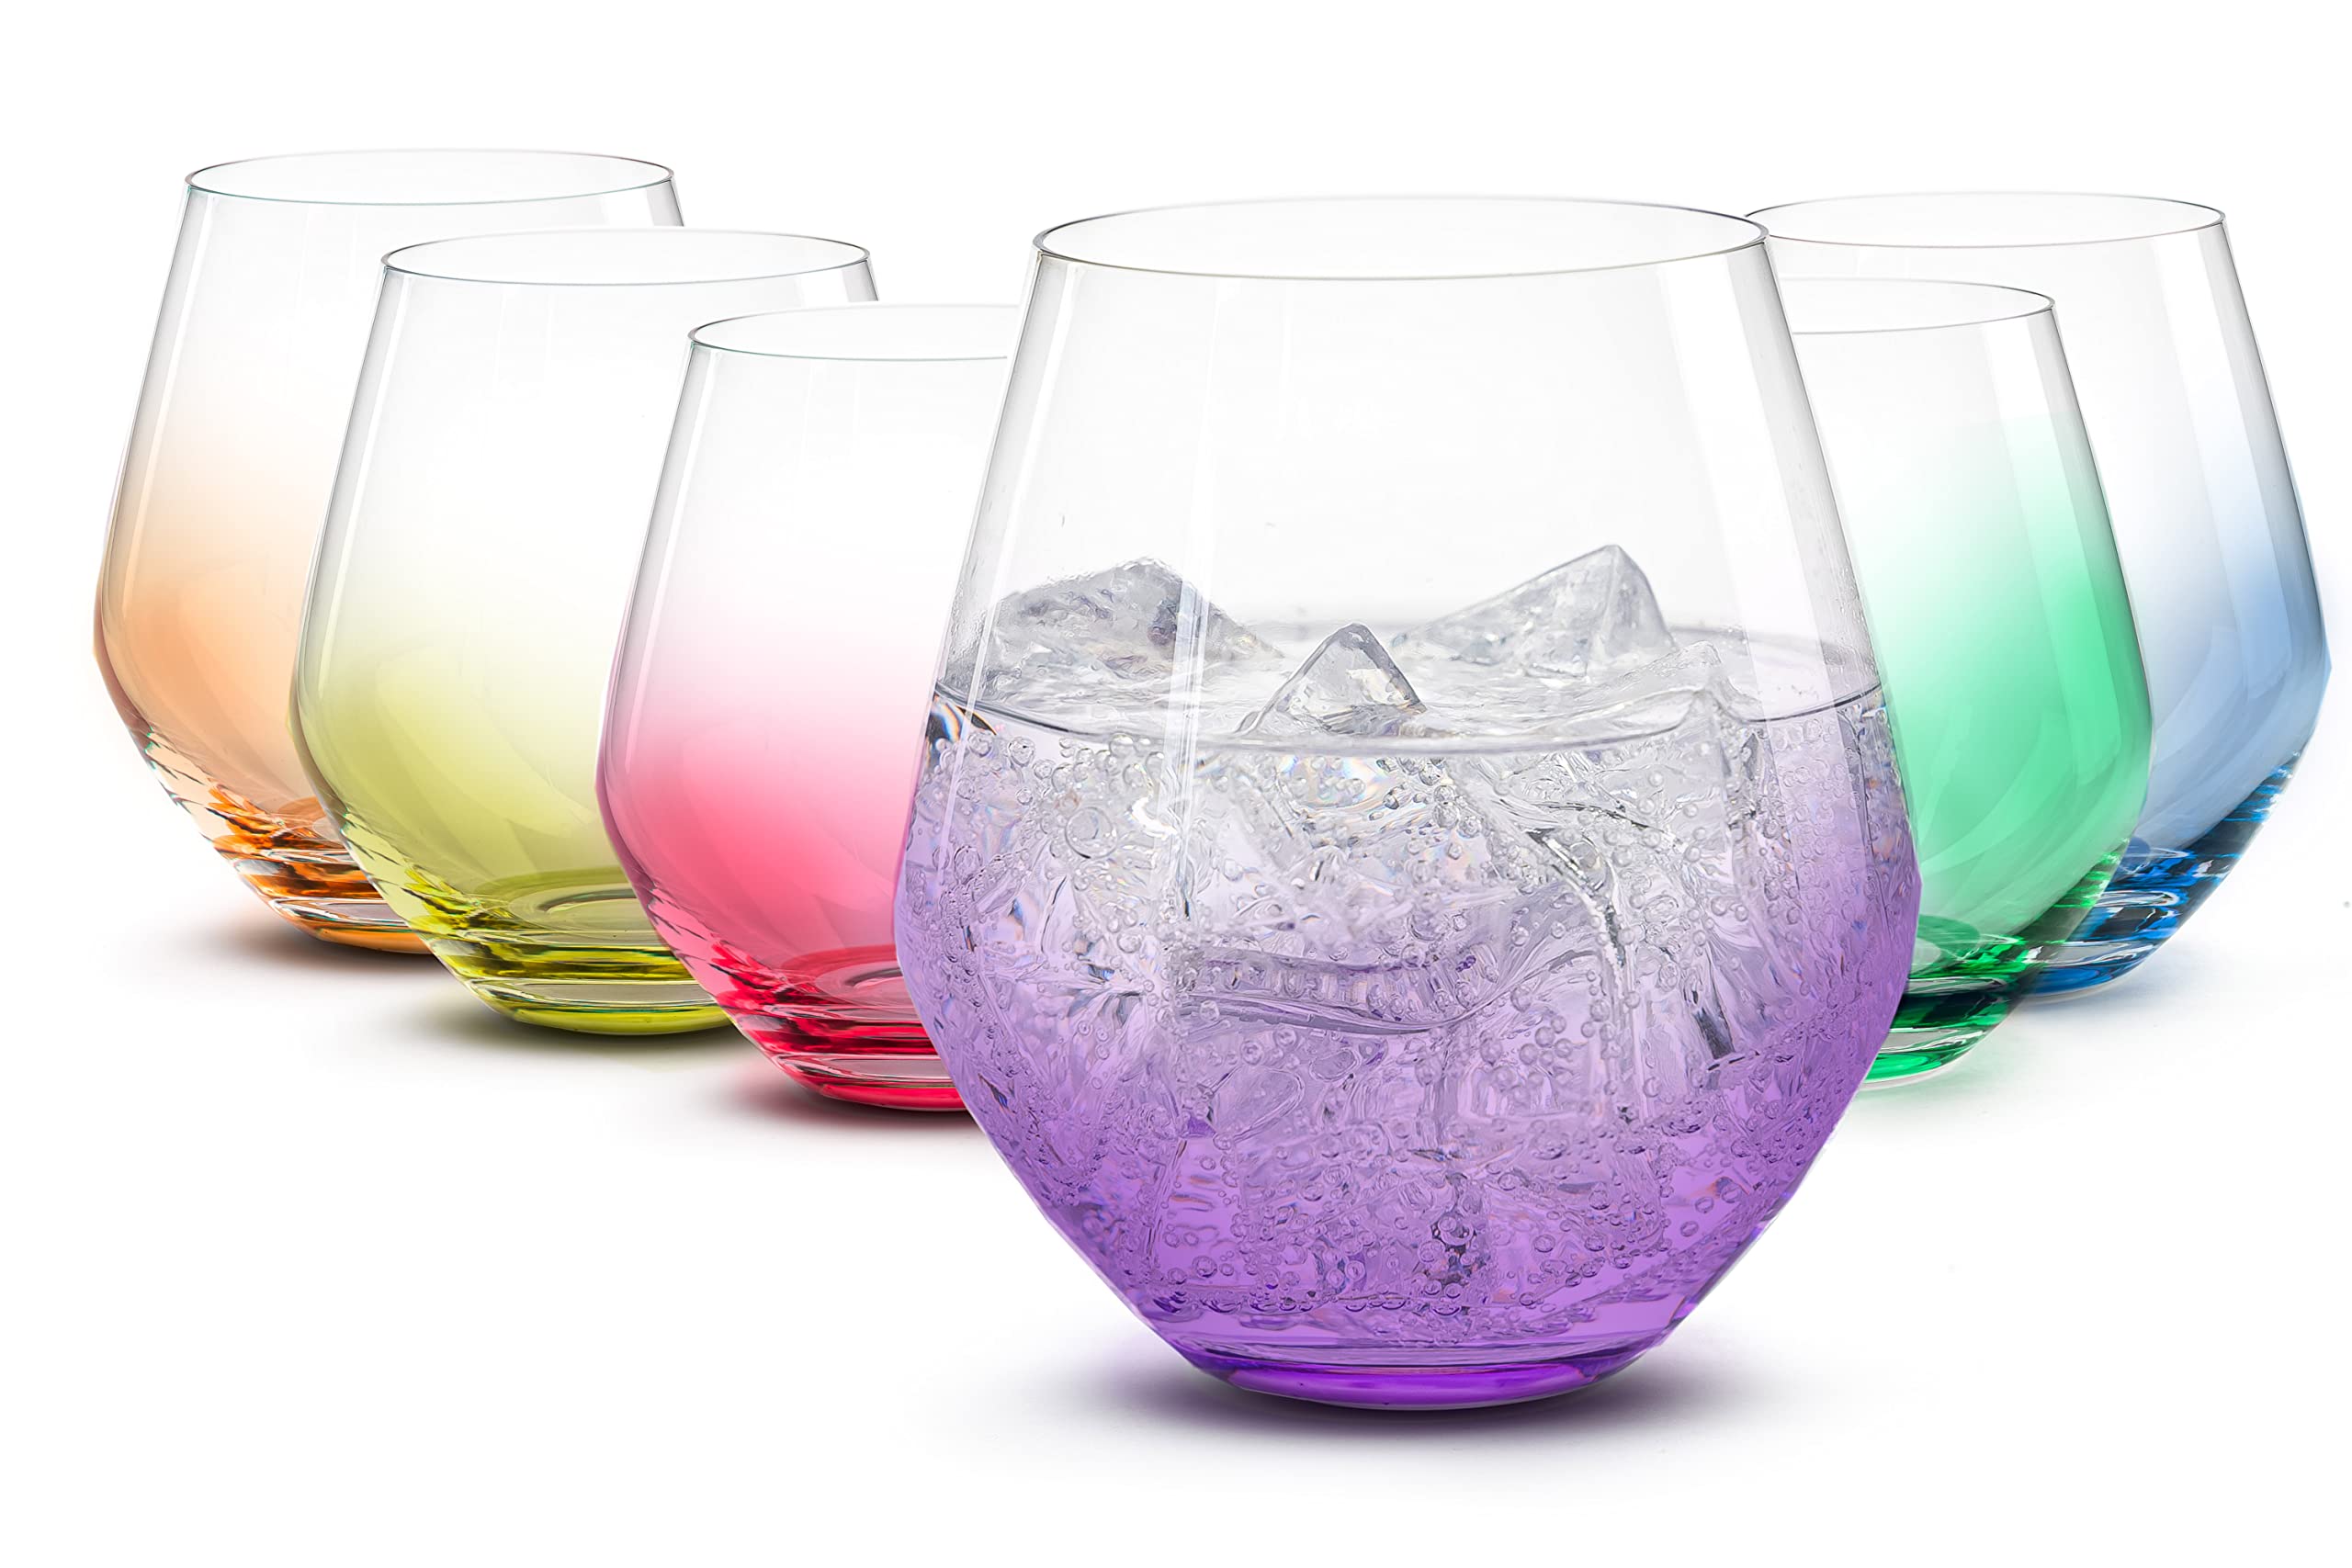 BENETI Premium Stemless Wine Glass | 18oz European Made Colored Stemless Wine Glasses set 6 | Crystal Glass Durable Drinking Cups for Parties  - Like New